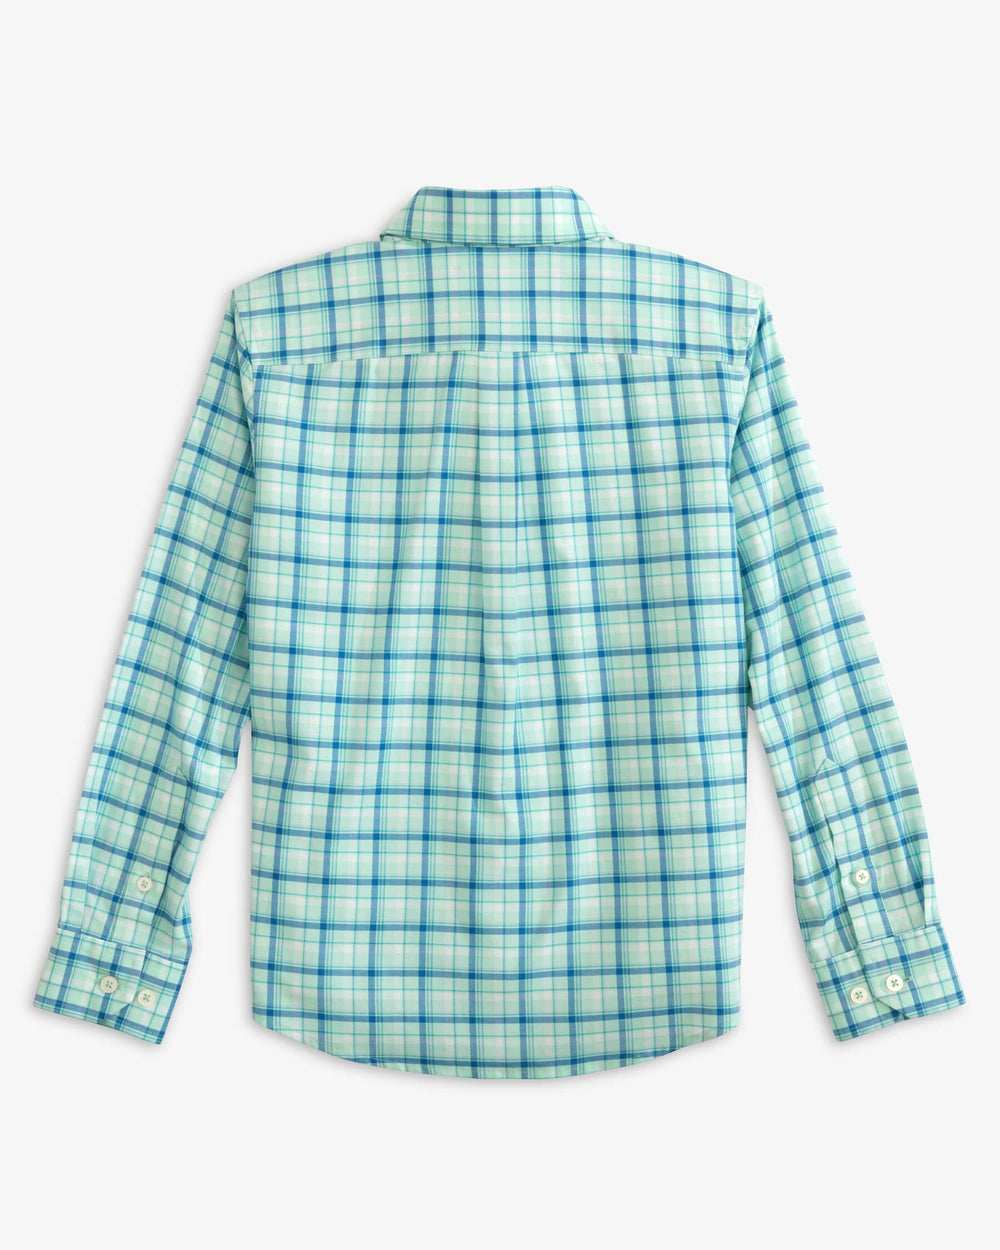 The back view of the Southern Tide Boys Skipjack Palermo Plaid Sport Shirt by Southern Tide - Baltic Teal